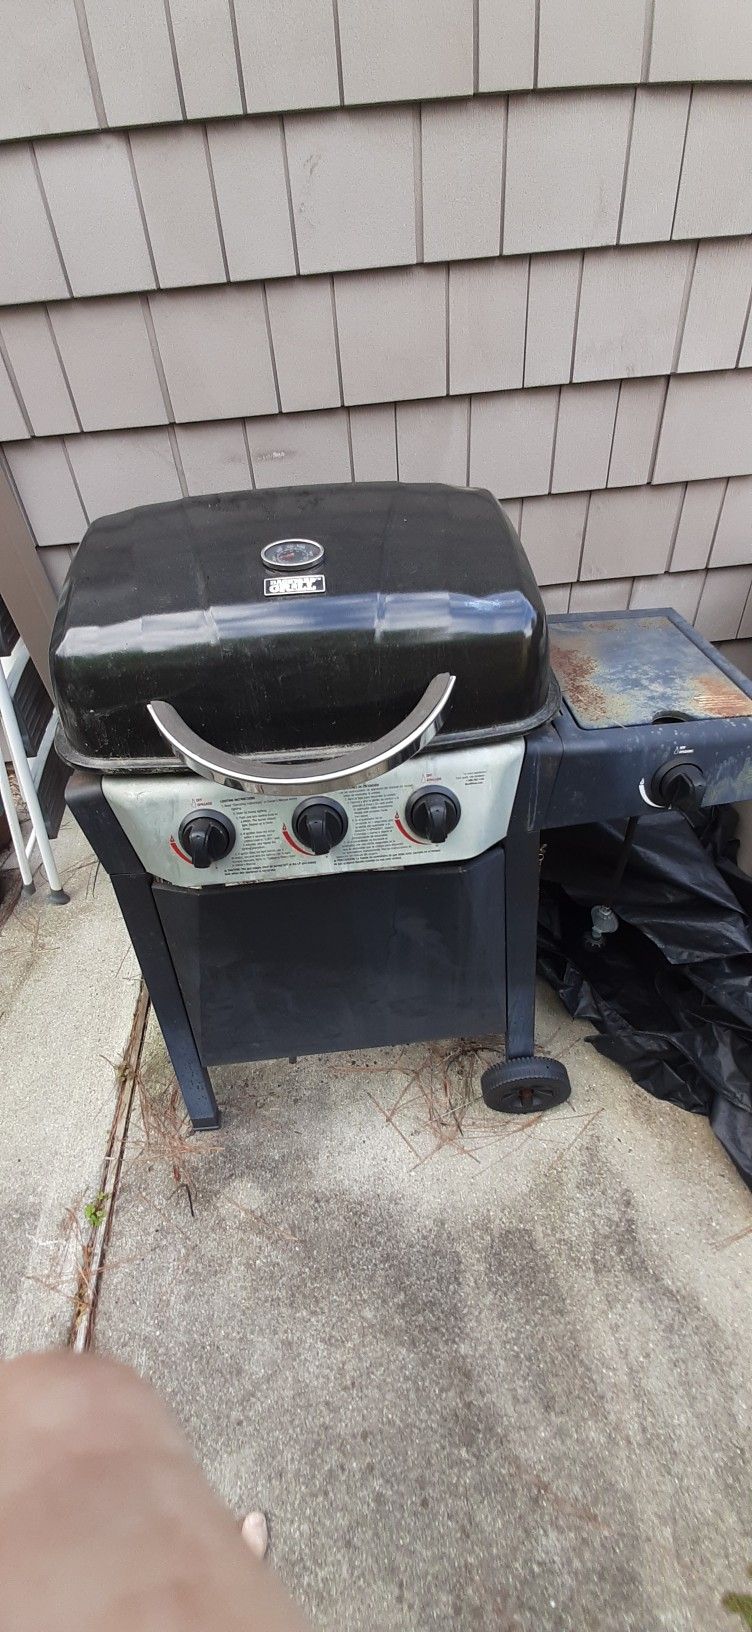 FREE GRILL! Just Pick It Up!